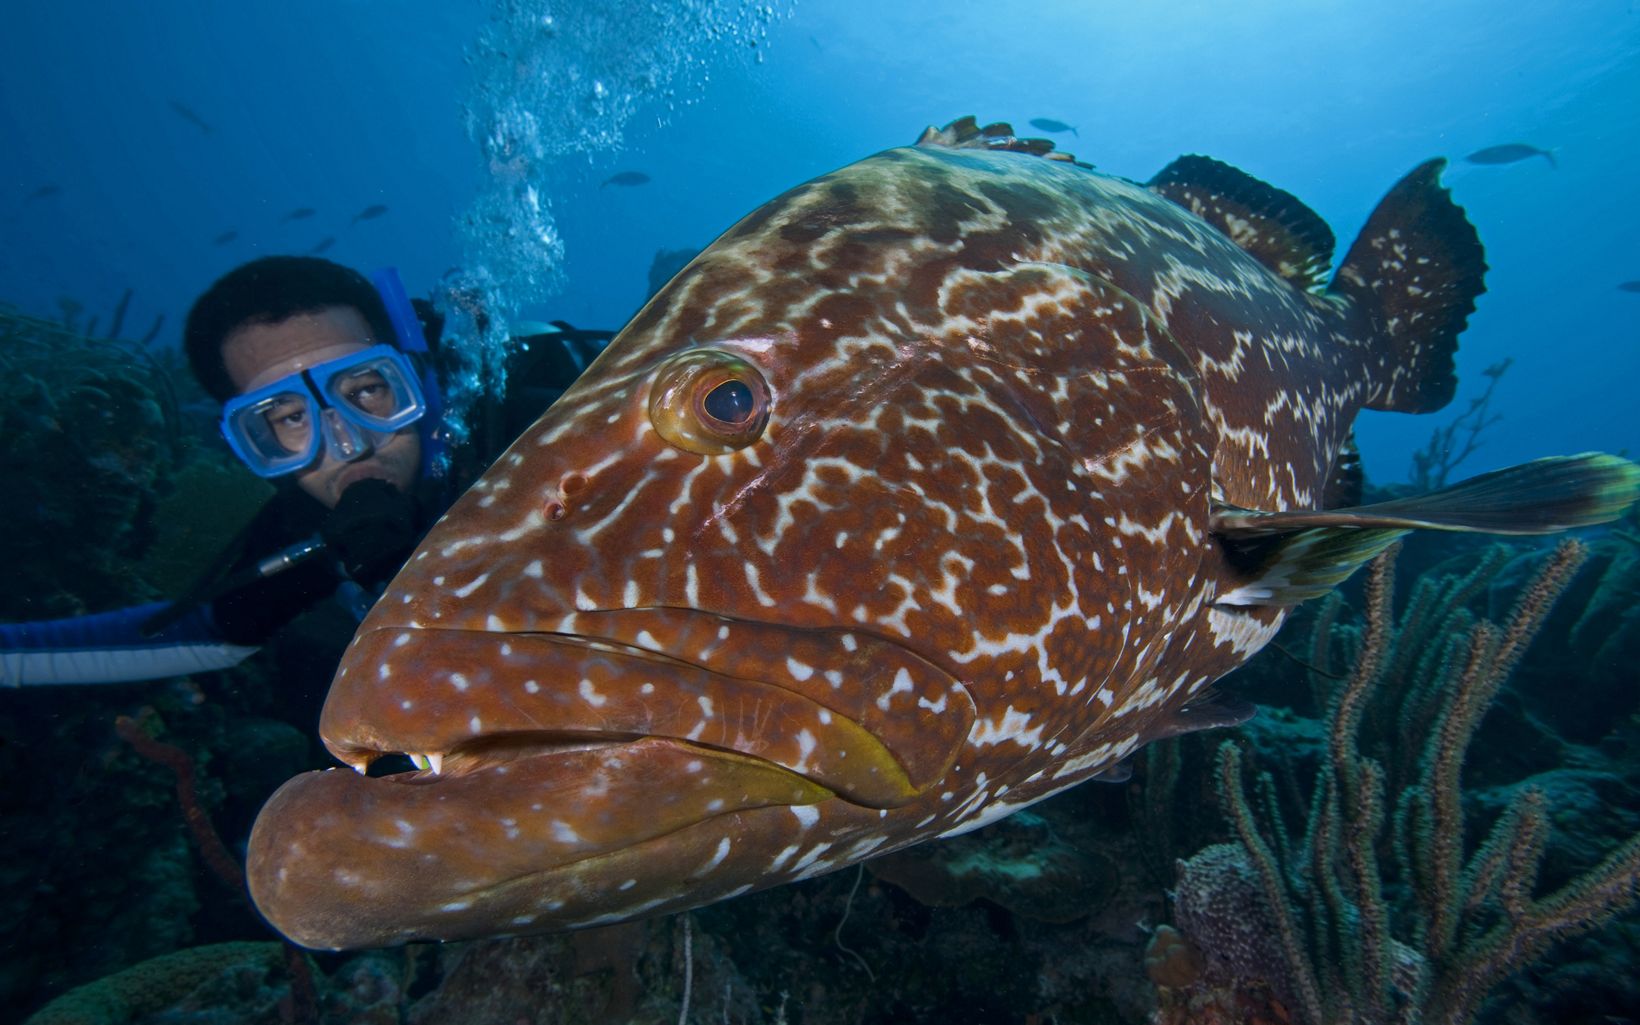 A TNC marine scientist gets up close and personal with a grouper.